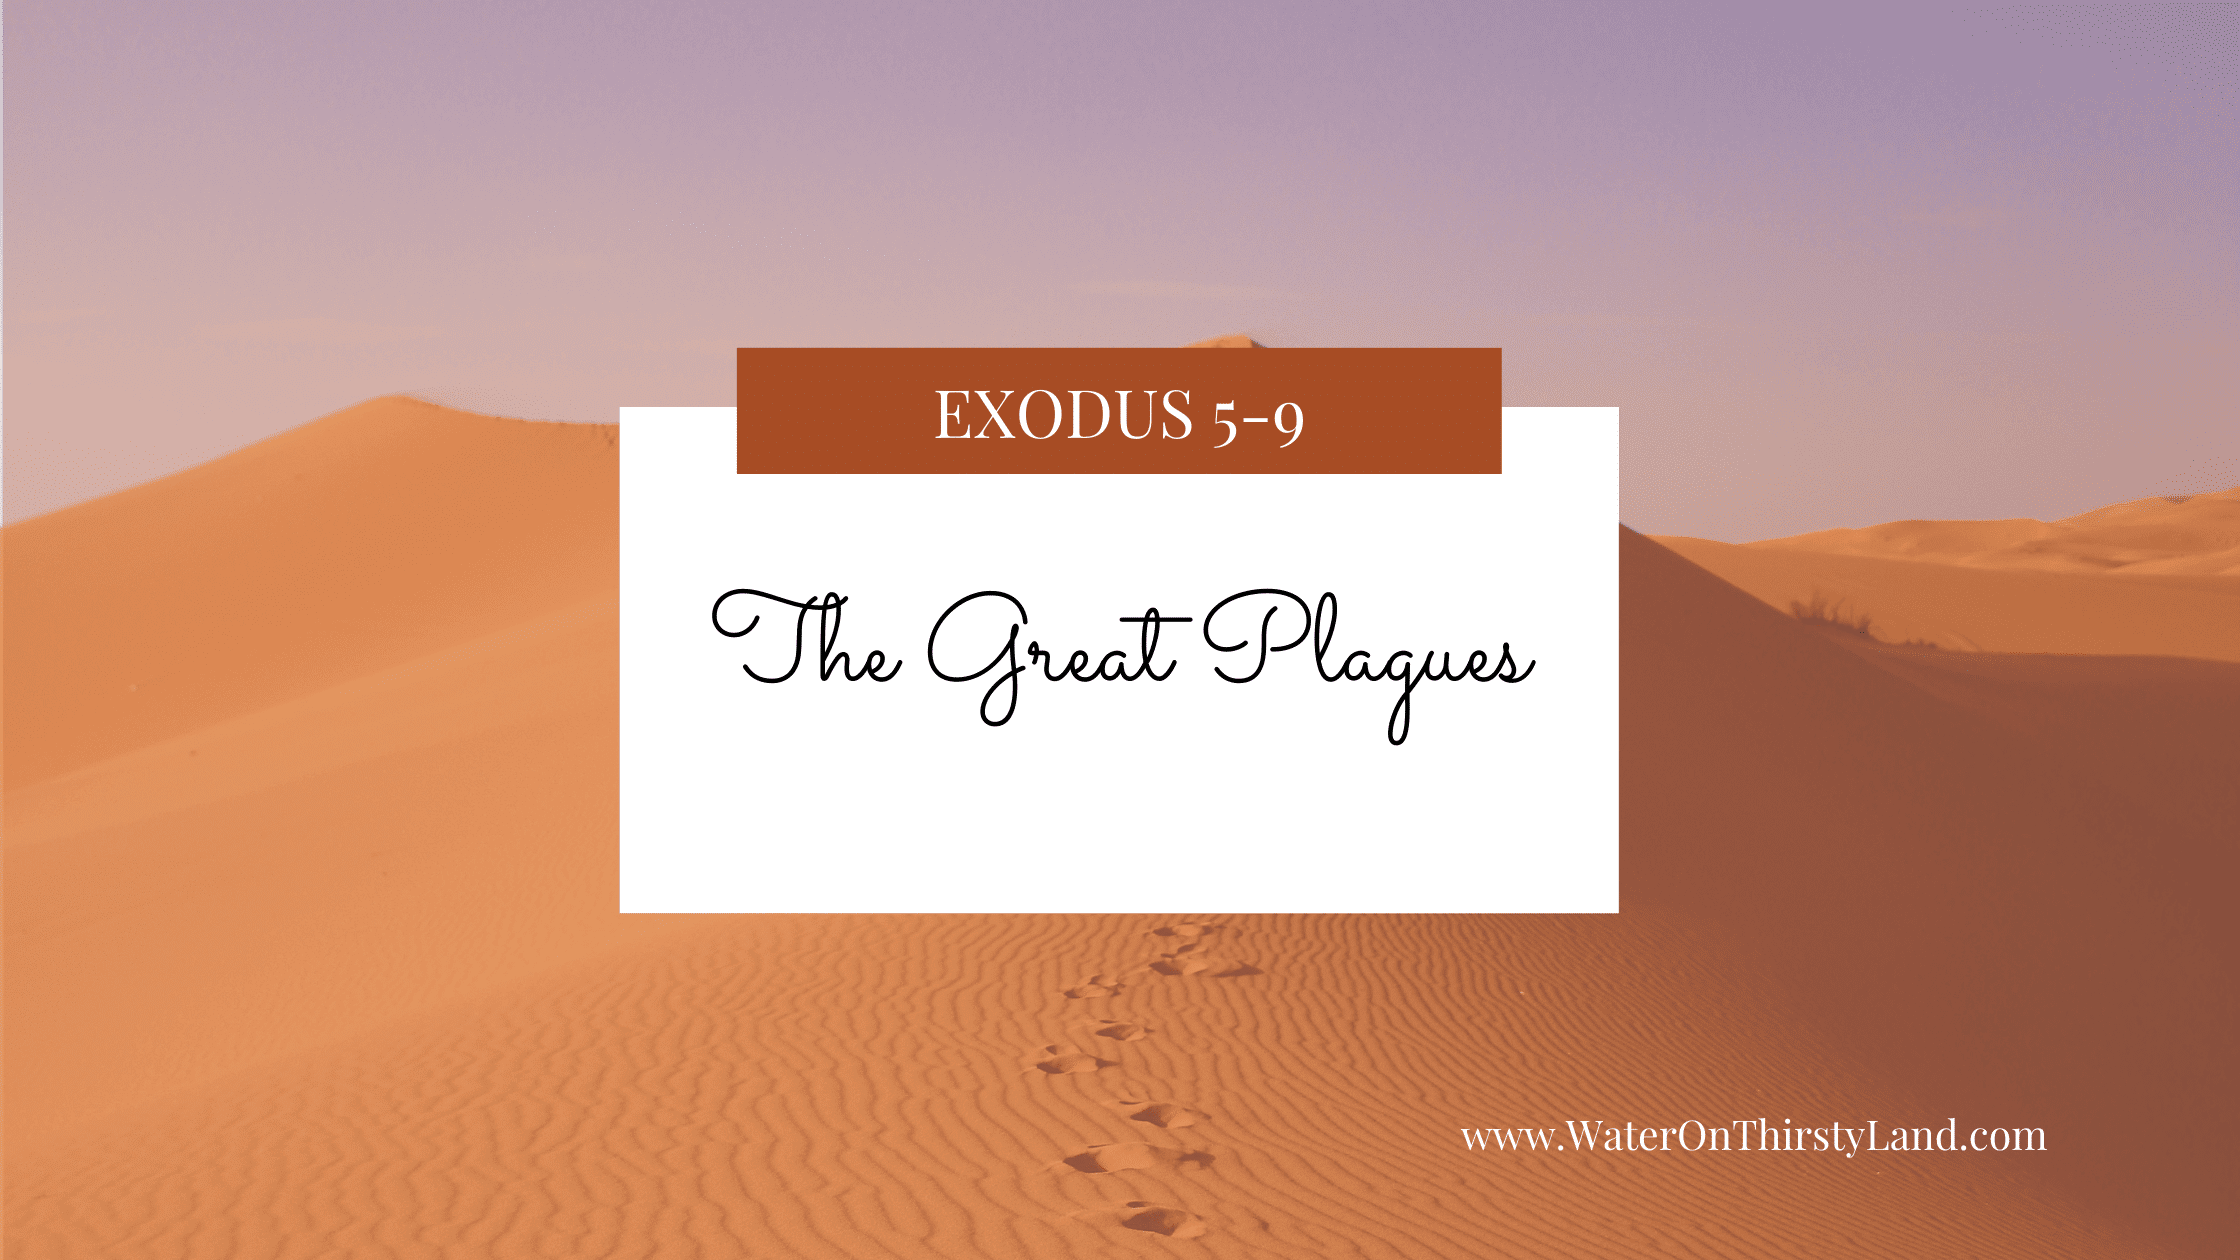 Exodus 5-9: The Great Plagues